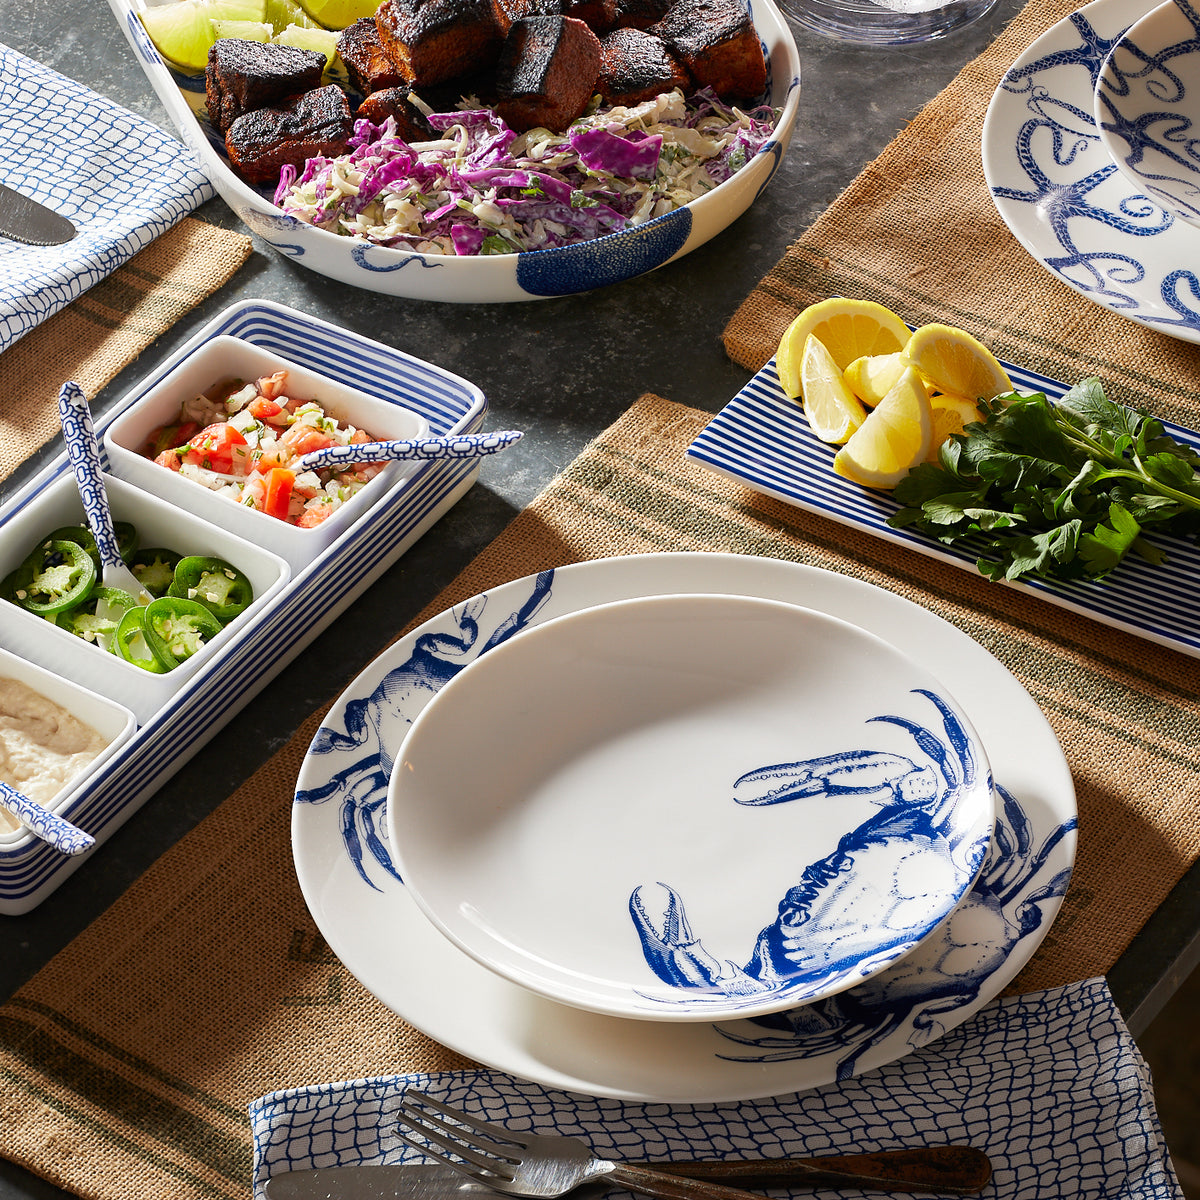 A table is set with Caskata Artisanal Home Crab Coupe Salad Plates made of premium porcelain, a dish of mixed salad and charred meat, a tray with condiments, sliced lemons, and herbs. A fork and knife rest on burlap placemats.